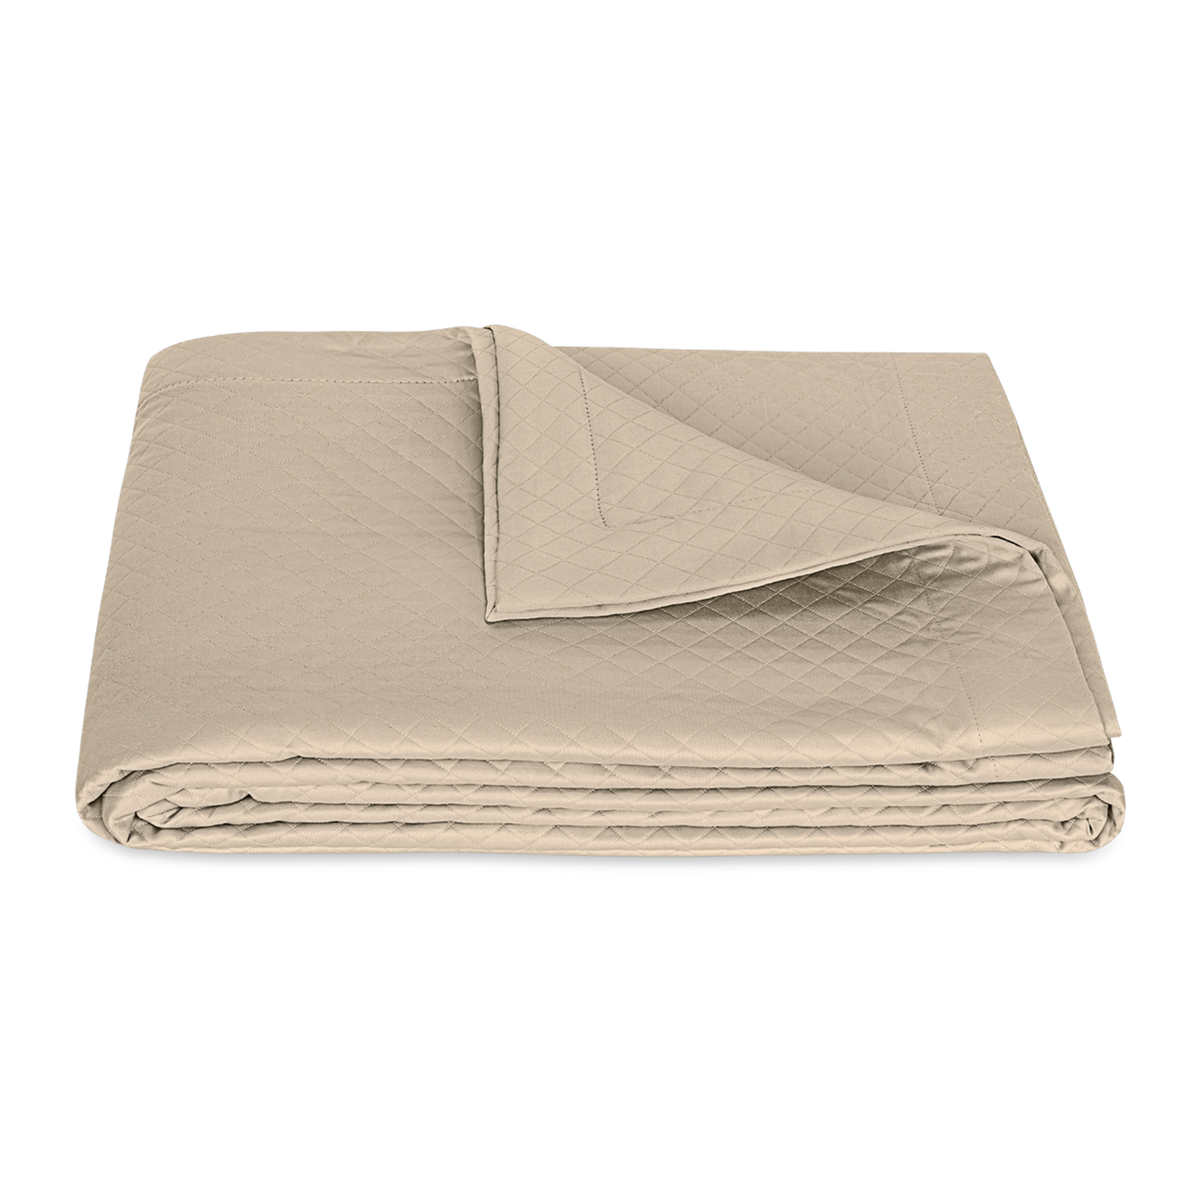 Folded Coverlet of Matouk Petra Bedding in Dune Color